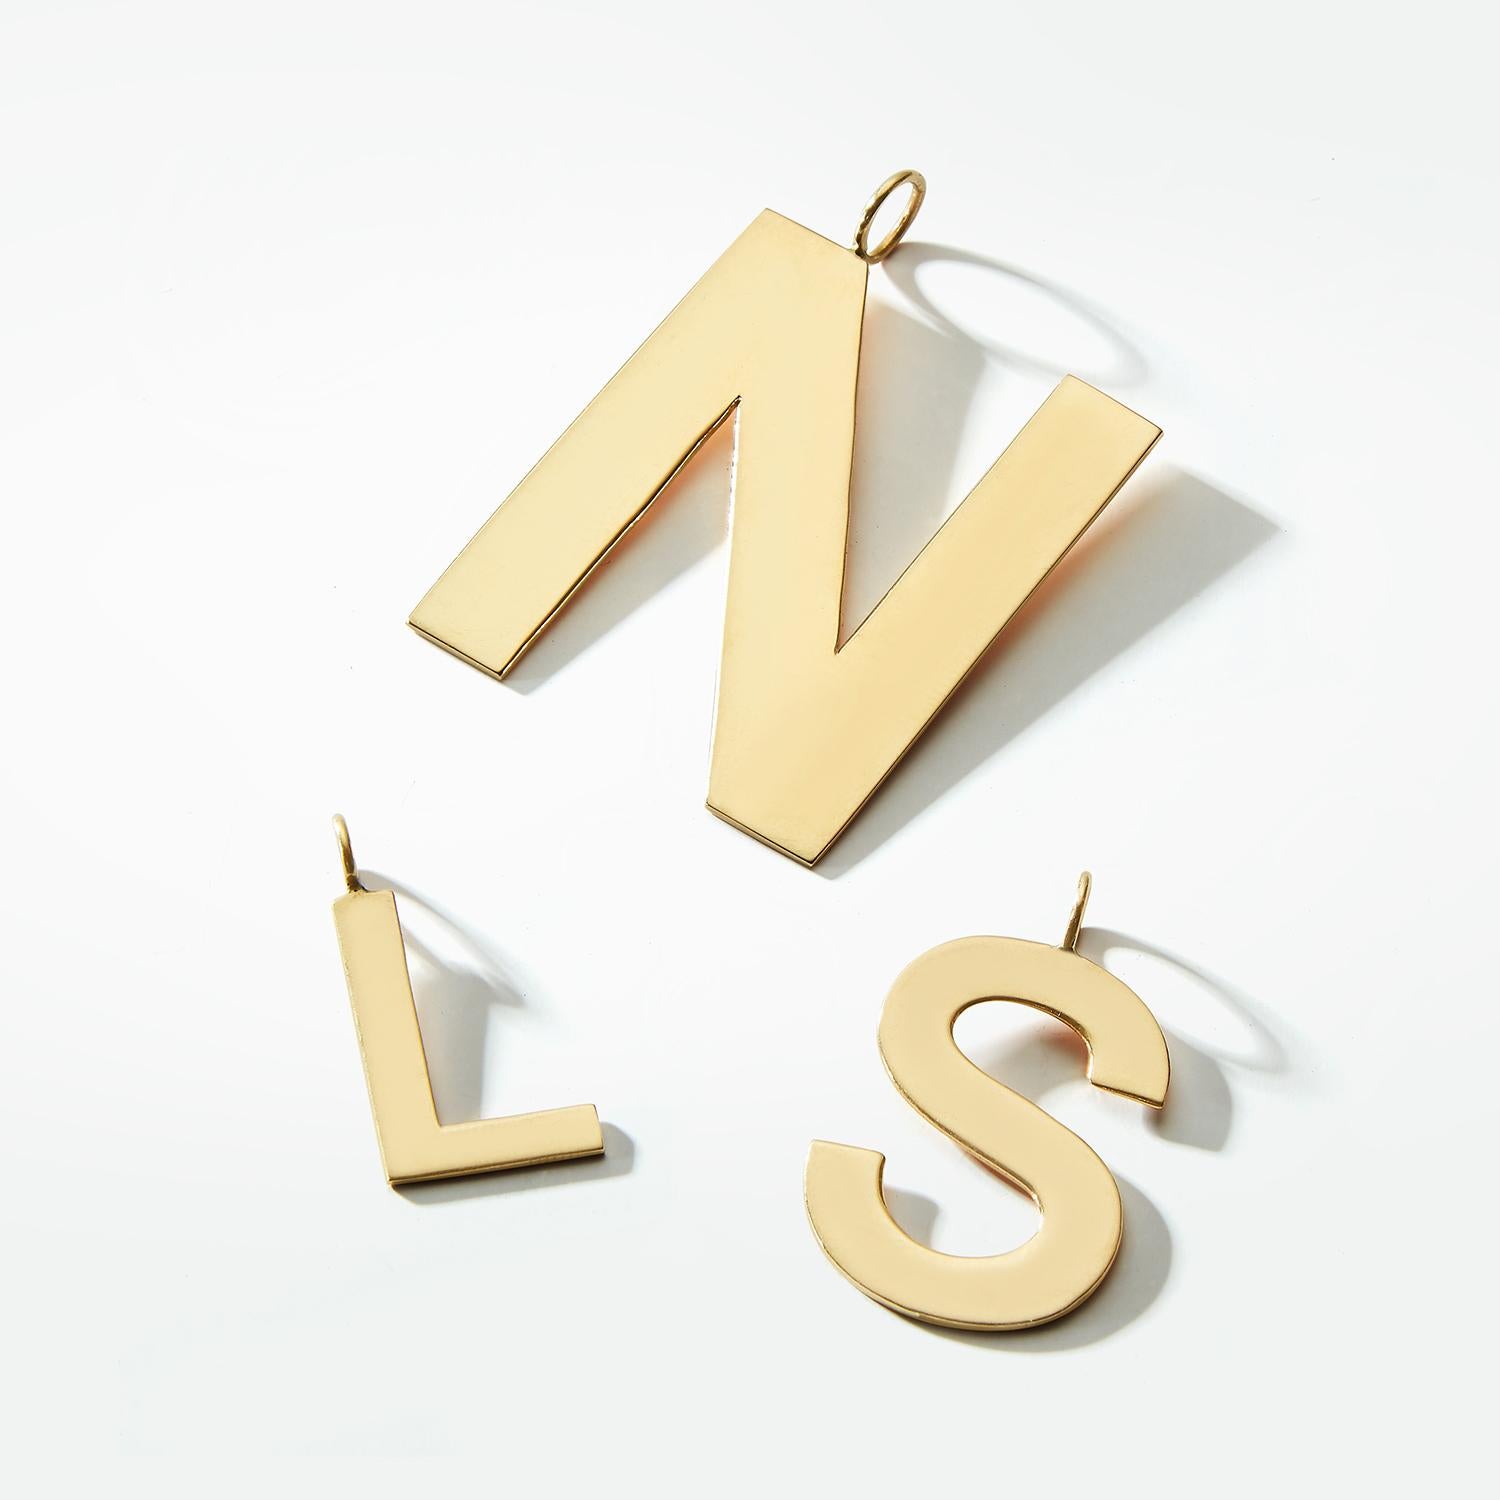 Our Medium Initial Charm Medallions make a big impact. Each block, solid gold letter is meticulously custom made by hand. They are available in every capital letter of the alphabet or single number. We love them for their dynamic look in an